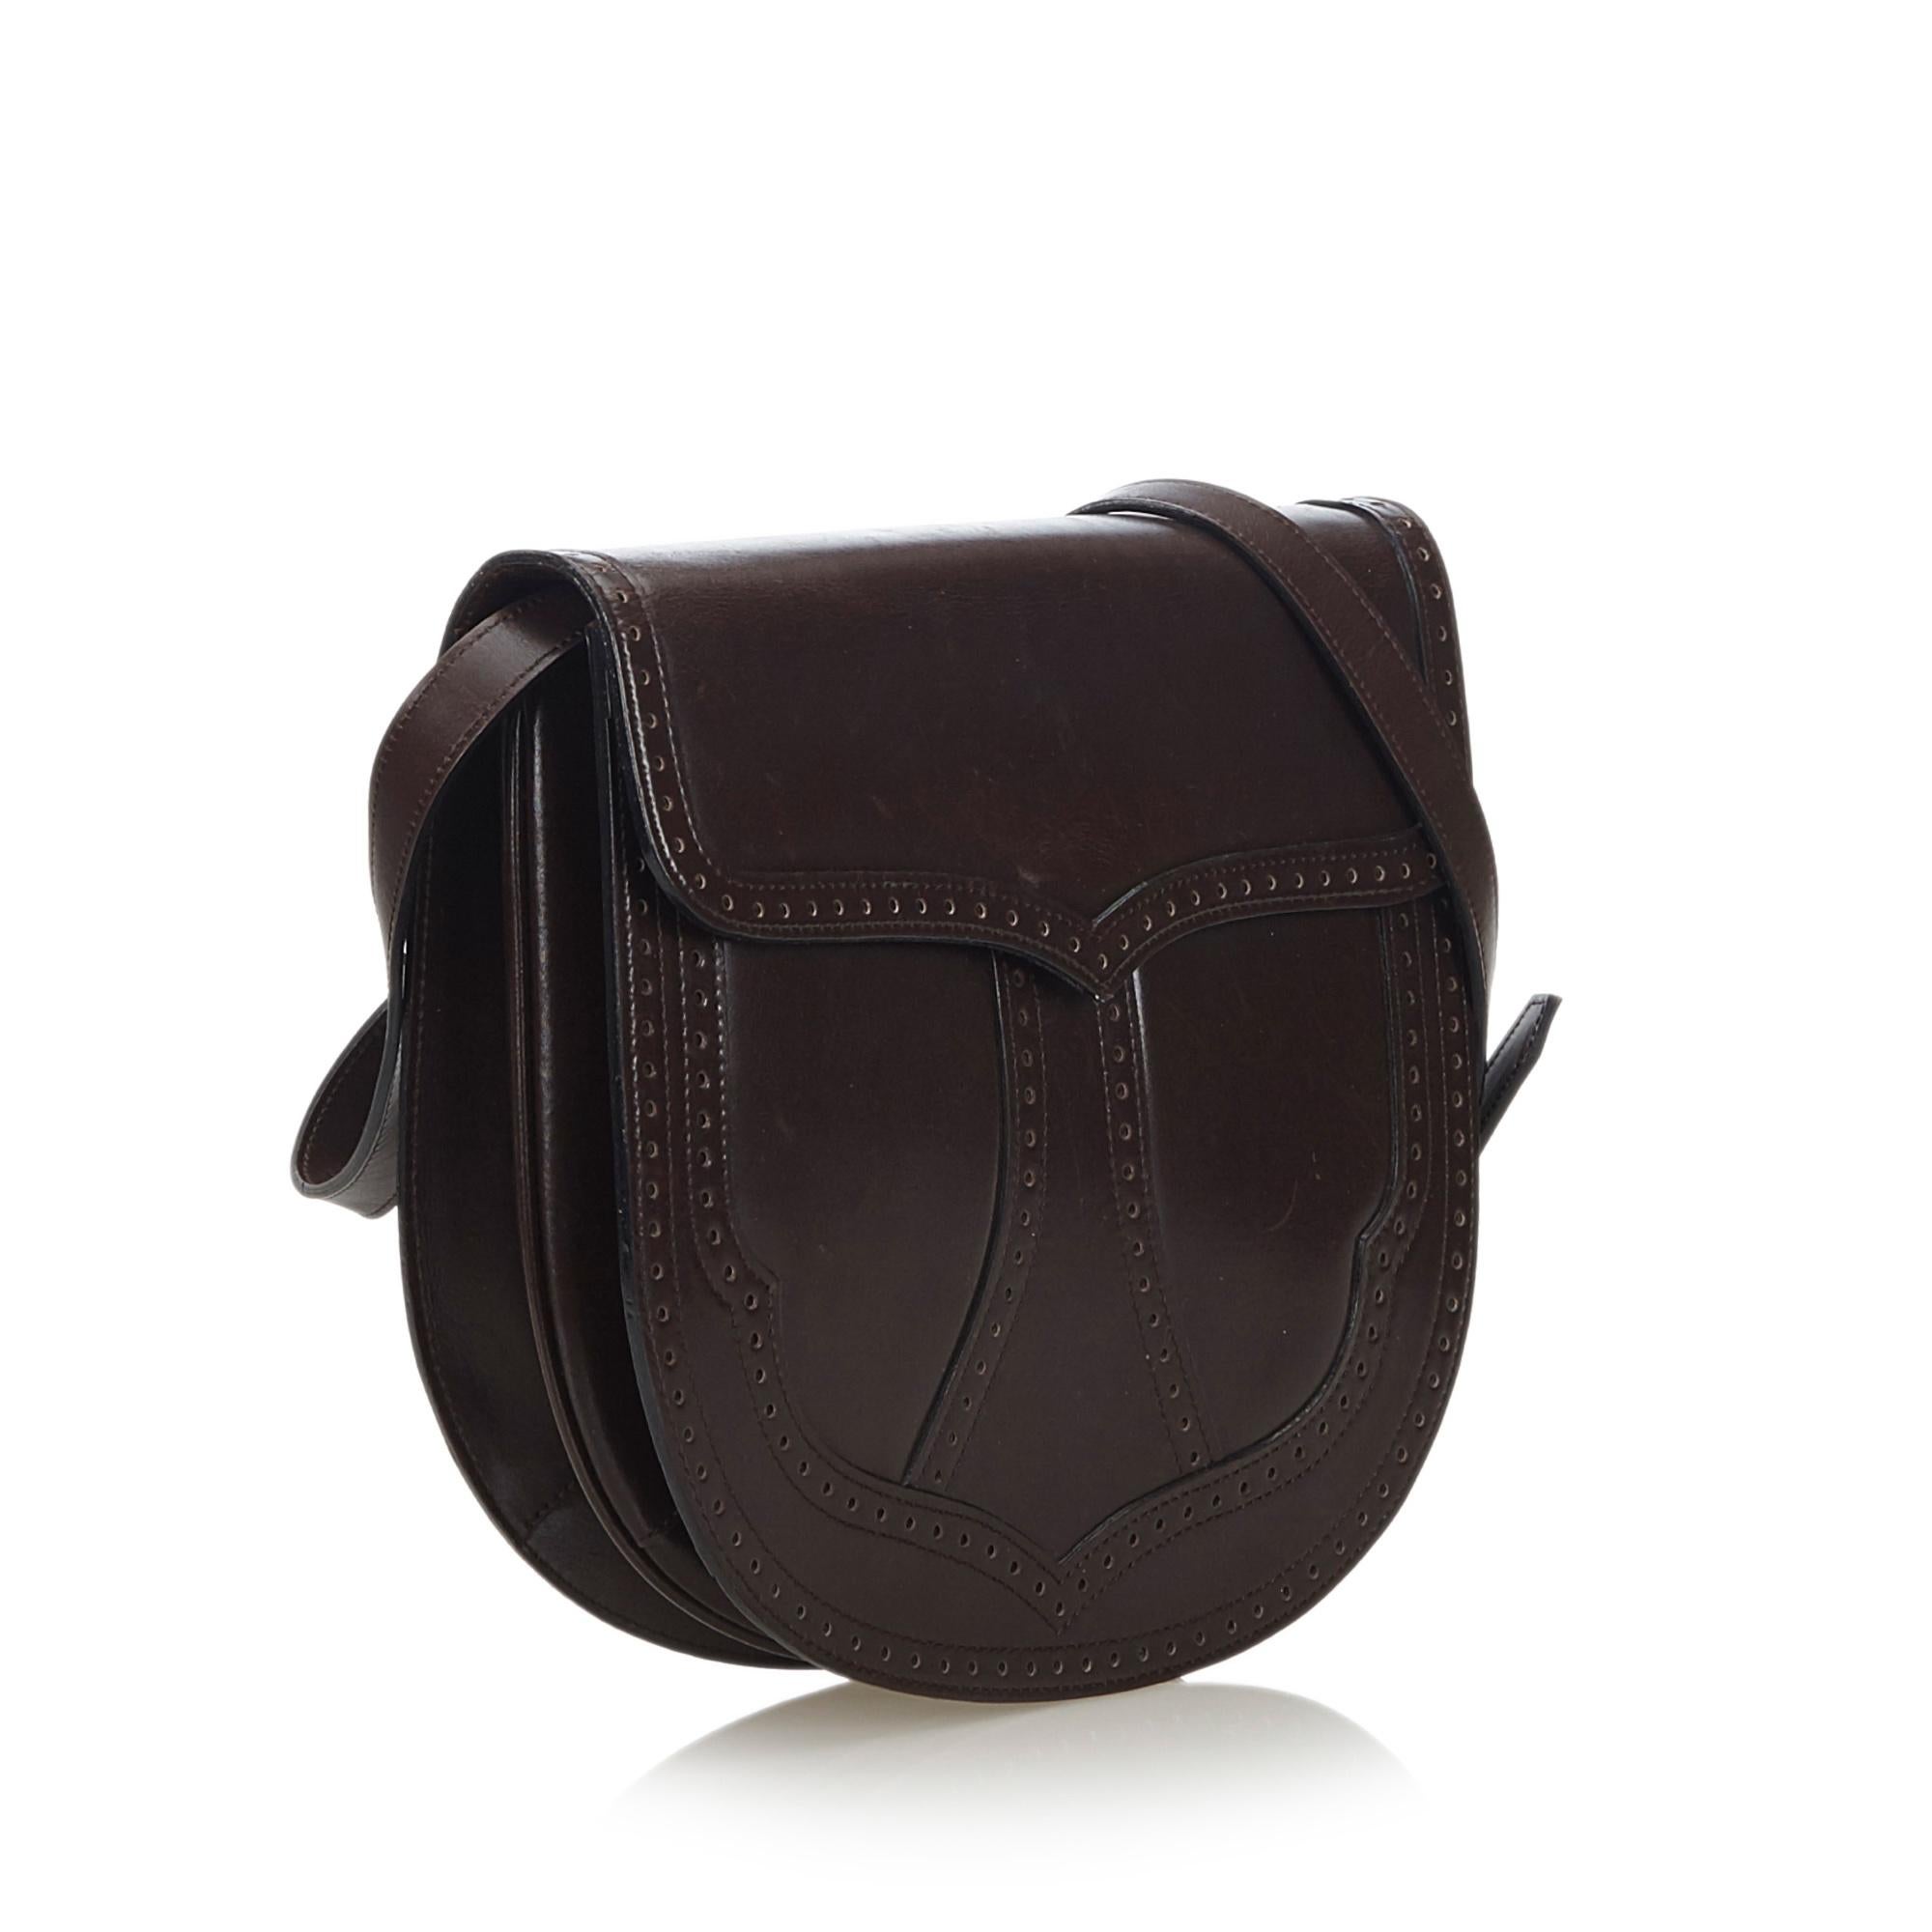 This crossbody bag features a leather body, a flat strap, a front flap magnetic snap button closure, and interior zip and slip pockets. It carries as B+ condition rating.

Inclusions: 
This item does not come with inclusions.

Dimensions:
Length: